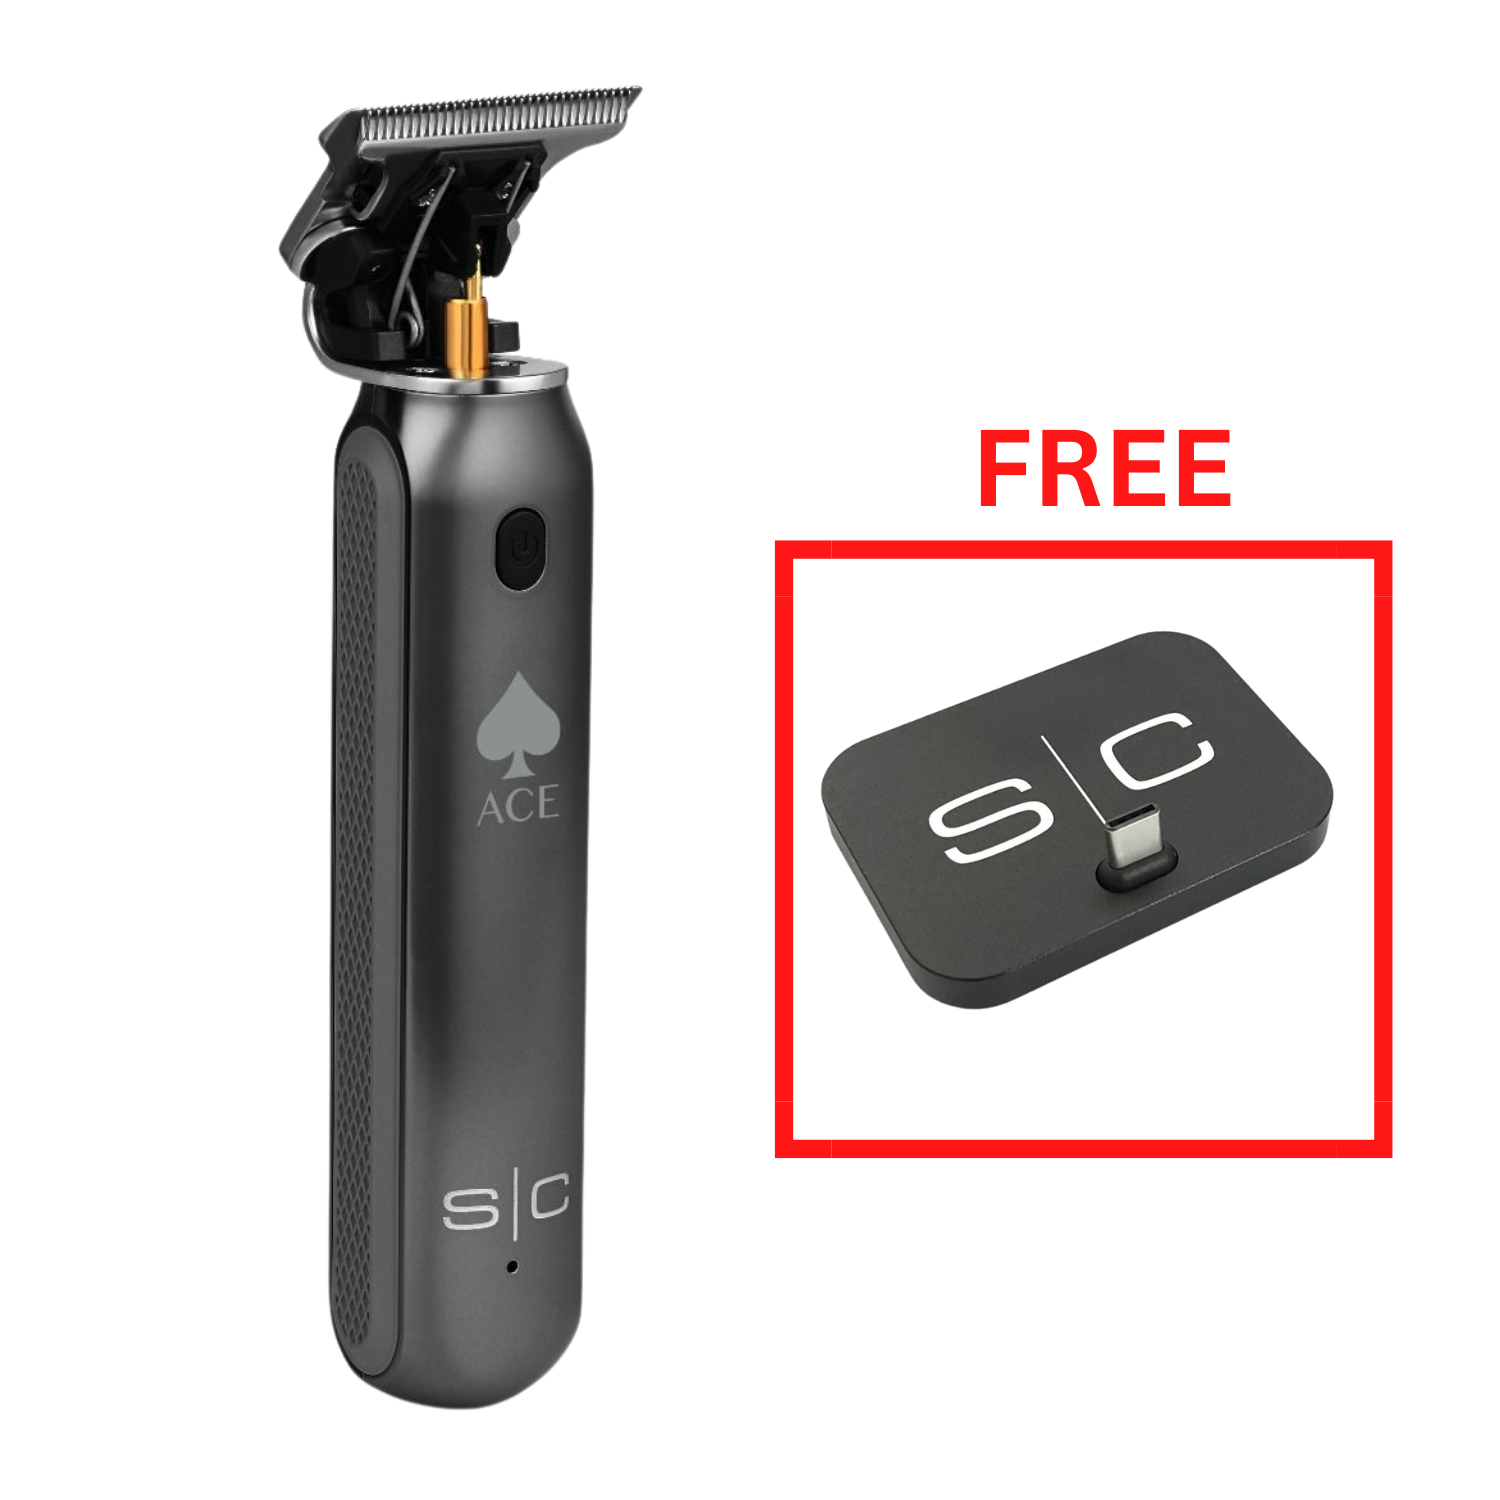 S|C Ace Trimmer + FREE S|C USB-C Station